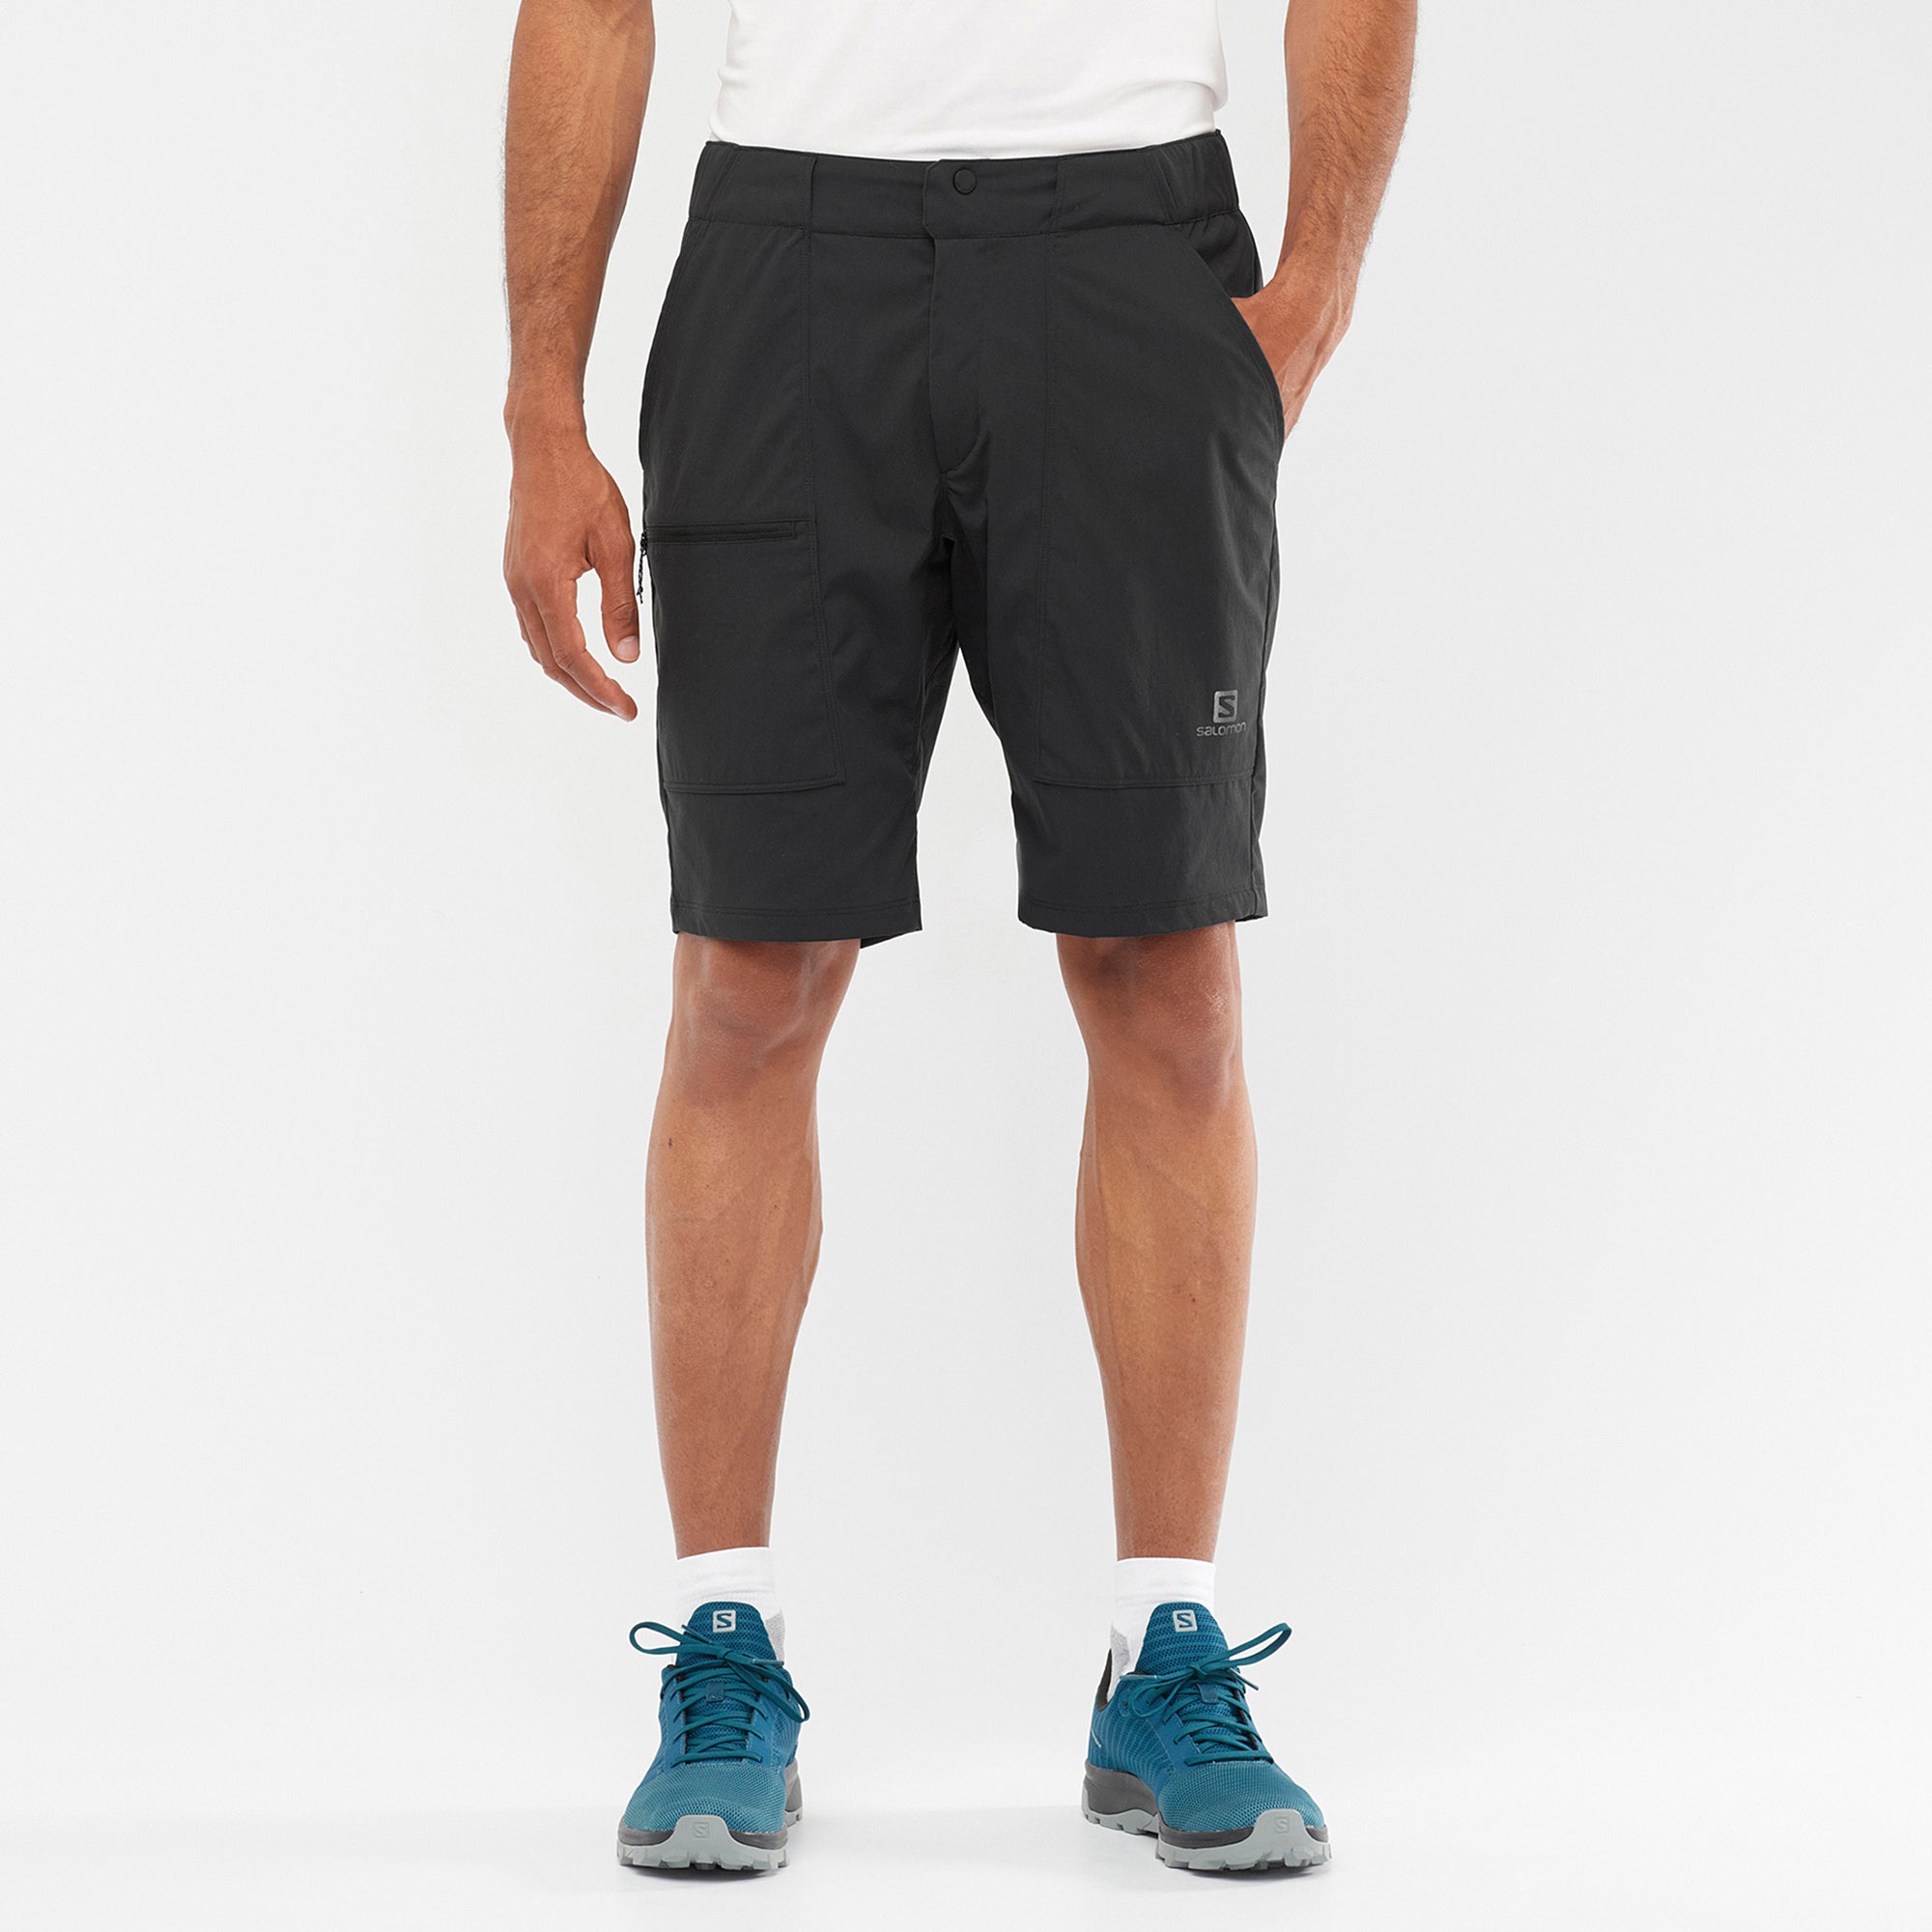 Men's Outdoor Shorts – Page 2